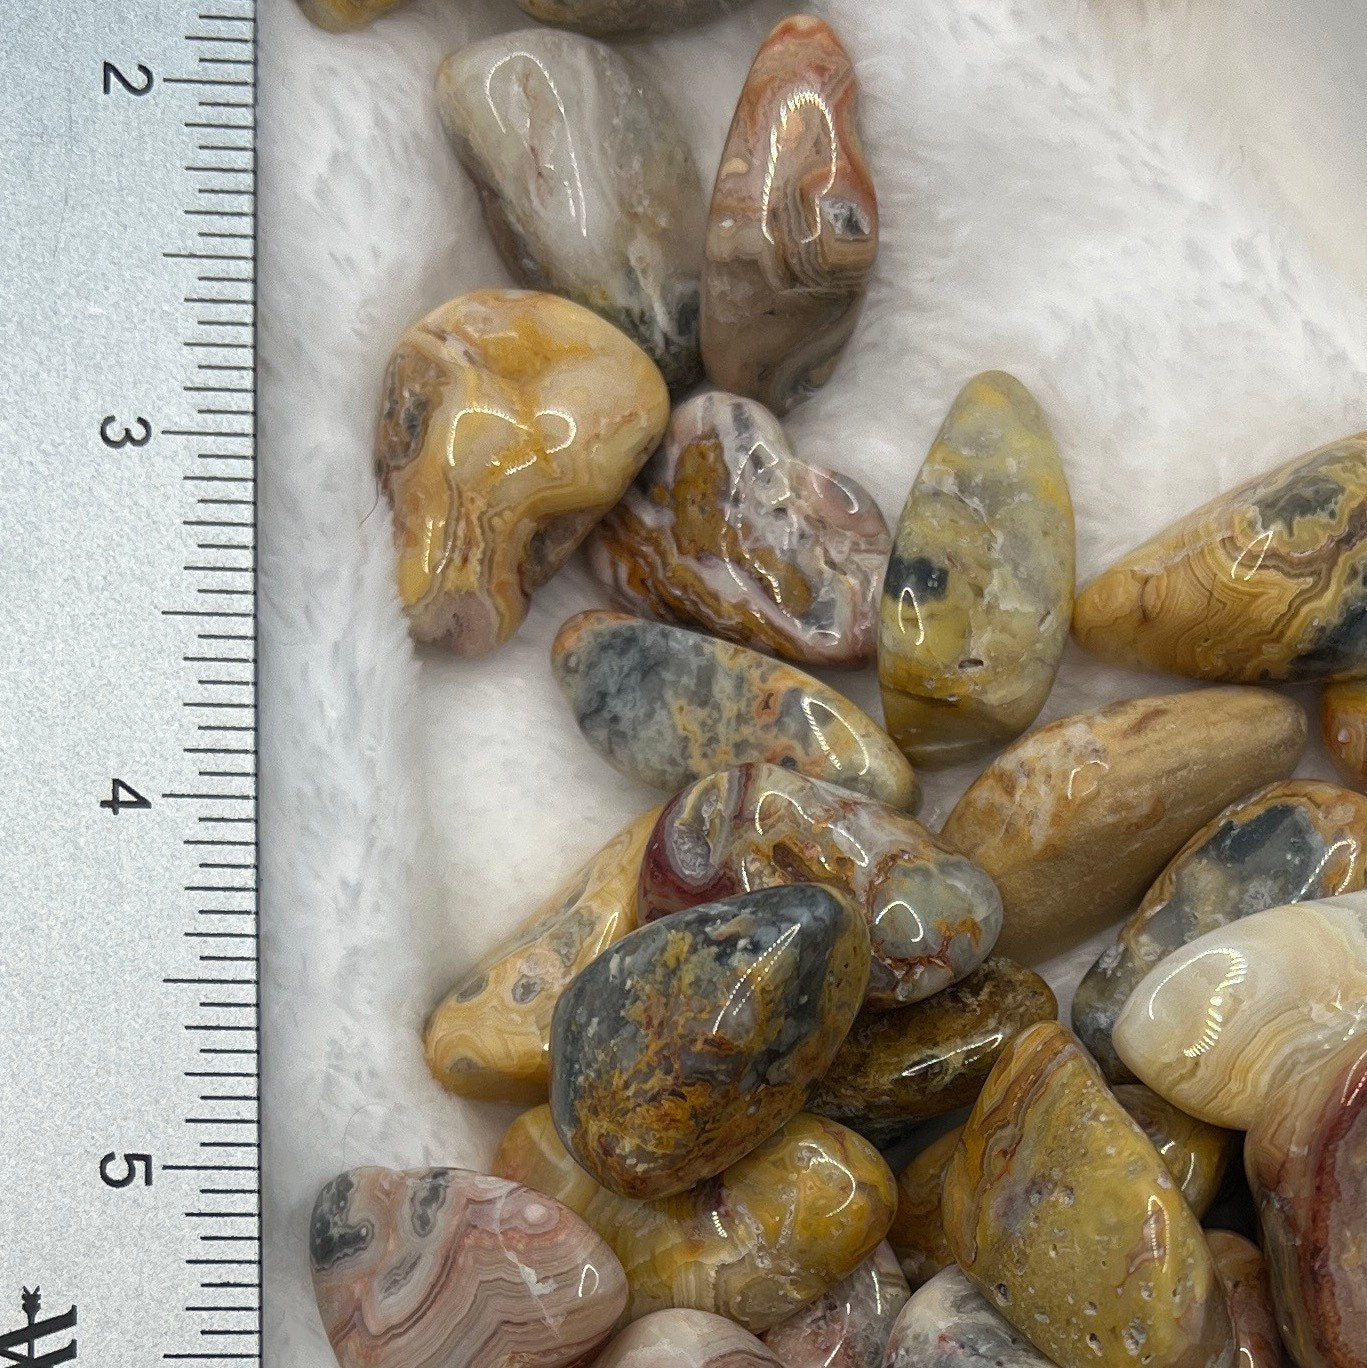 Crazy Lace Agate Tumbled Stone 0597 (Approx. 1”- 1 1/4”)